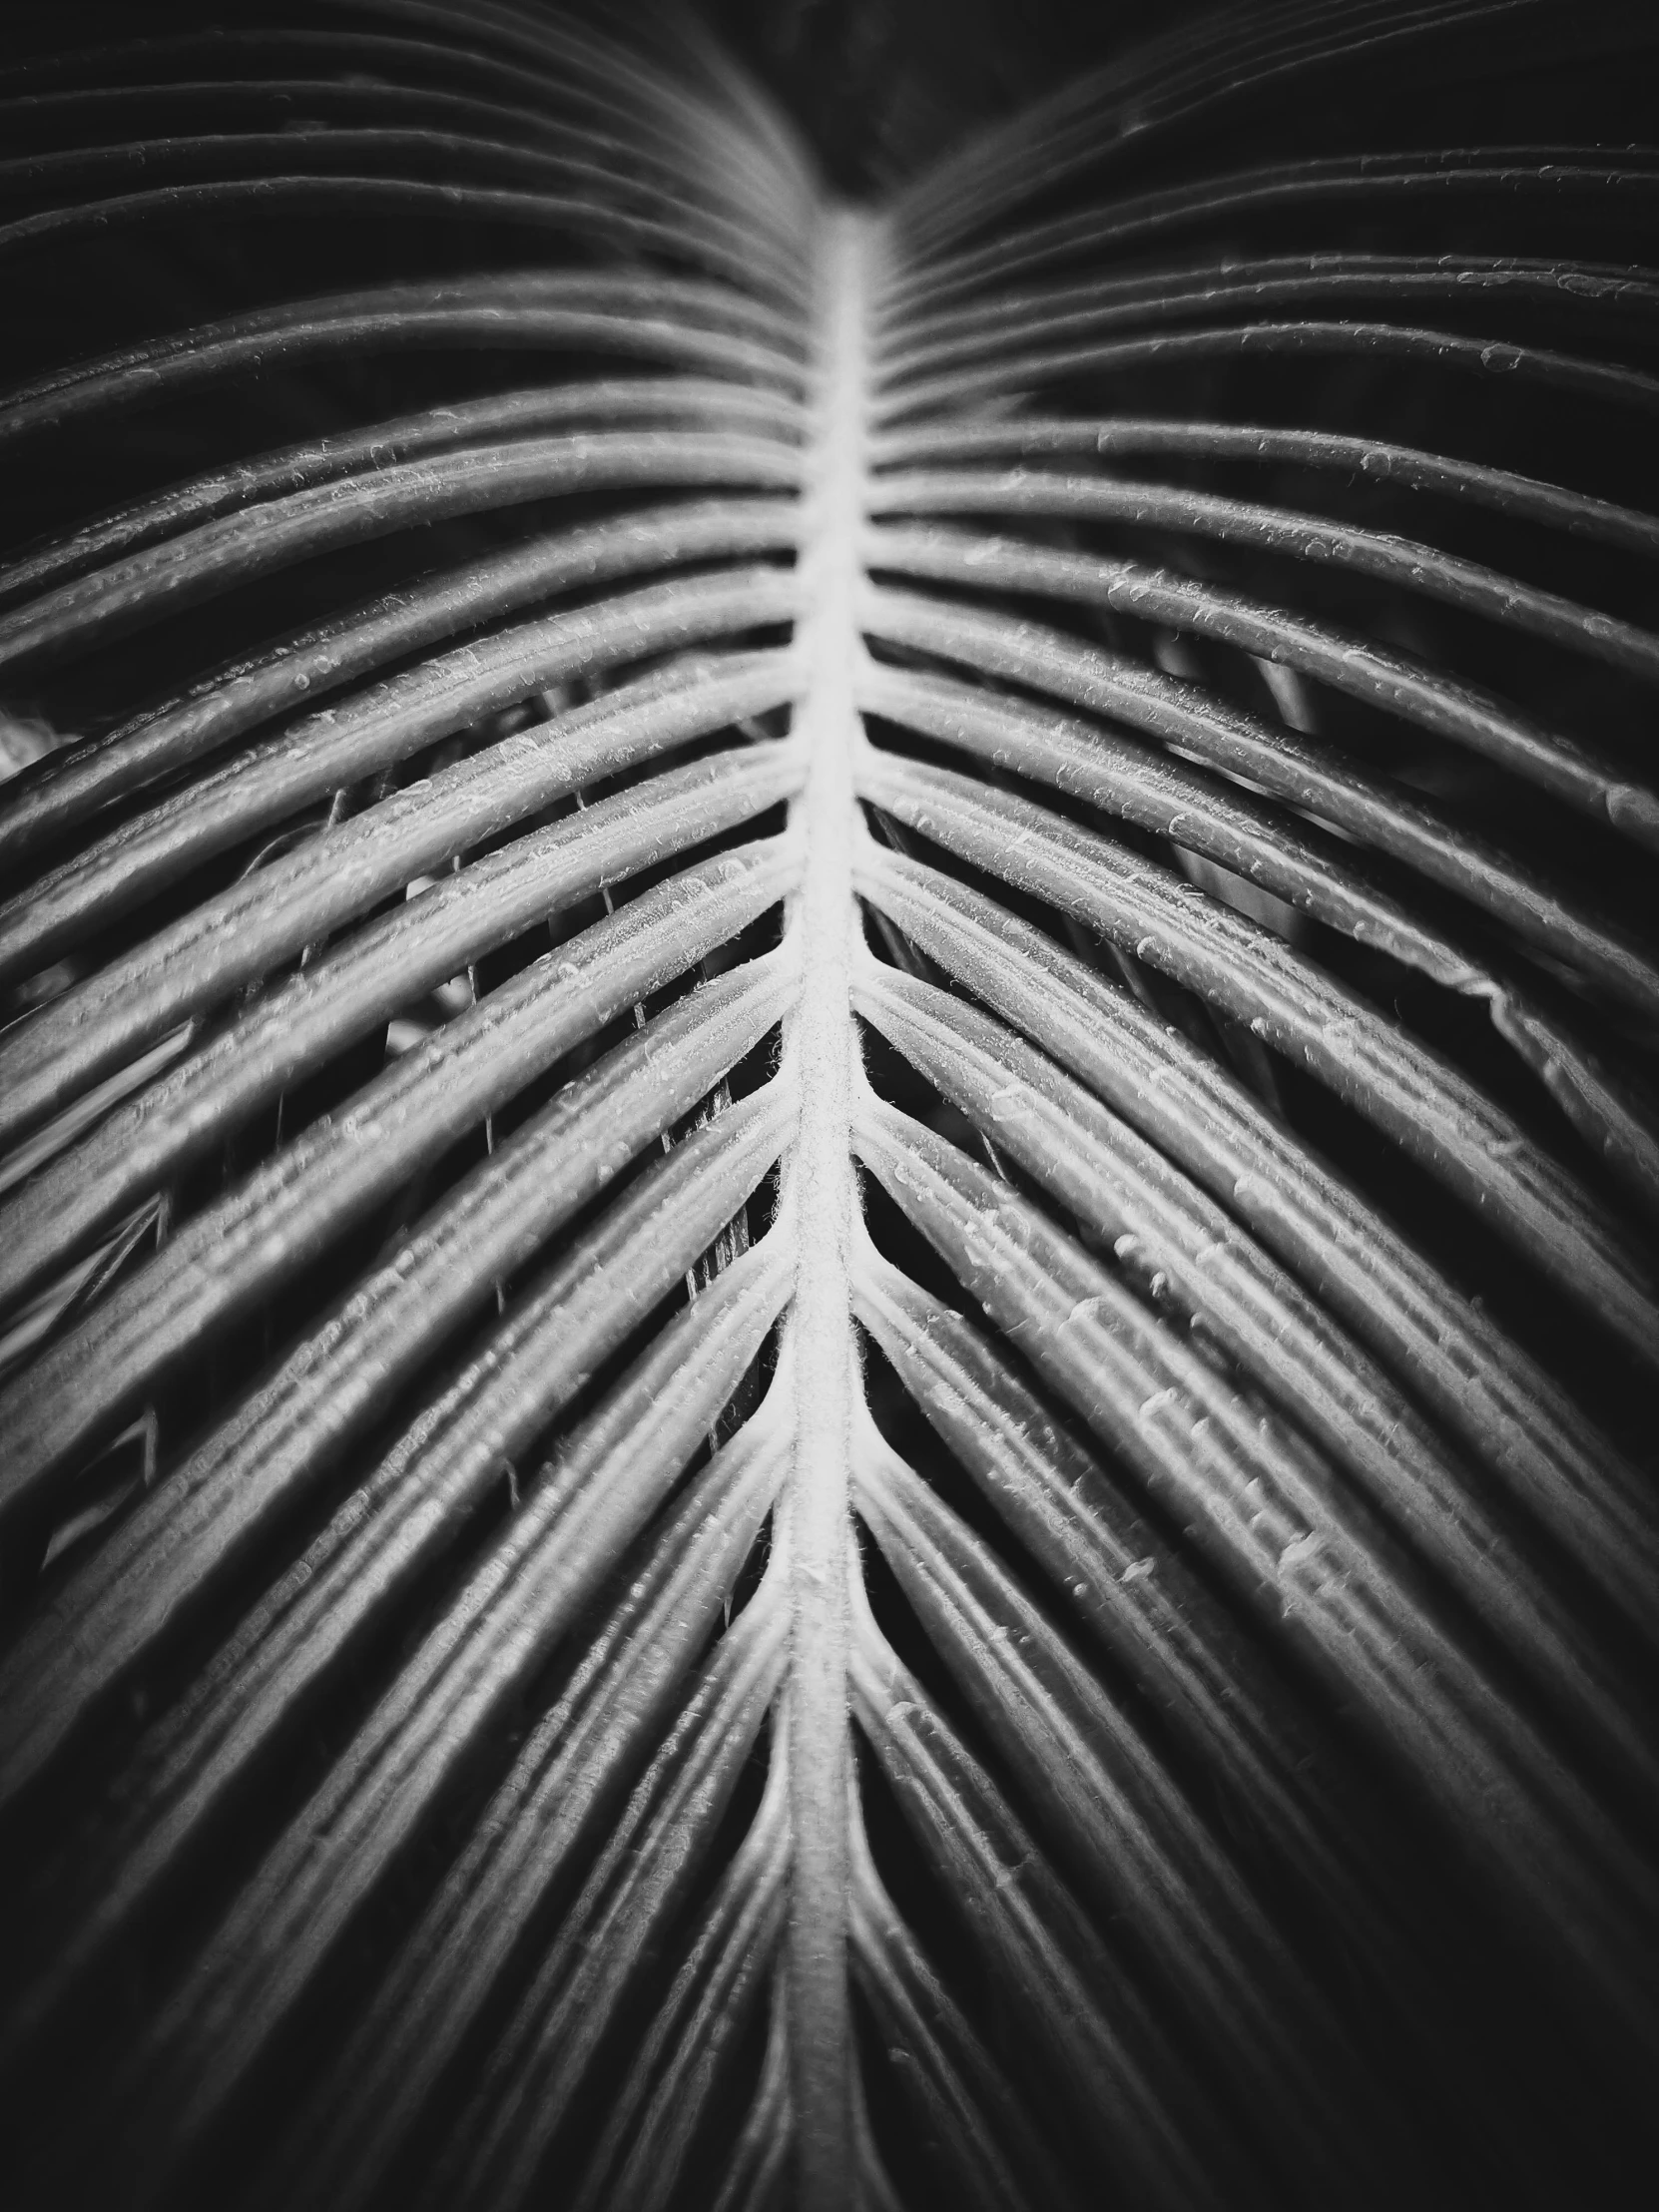 a black and white photo of a palm leaf, by Adam Chmielowski, ribcage, detailed medium format photo, alessio albi, beautiful surroundings